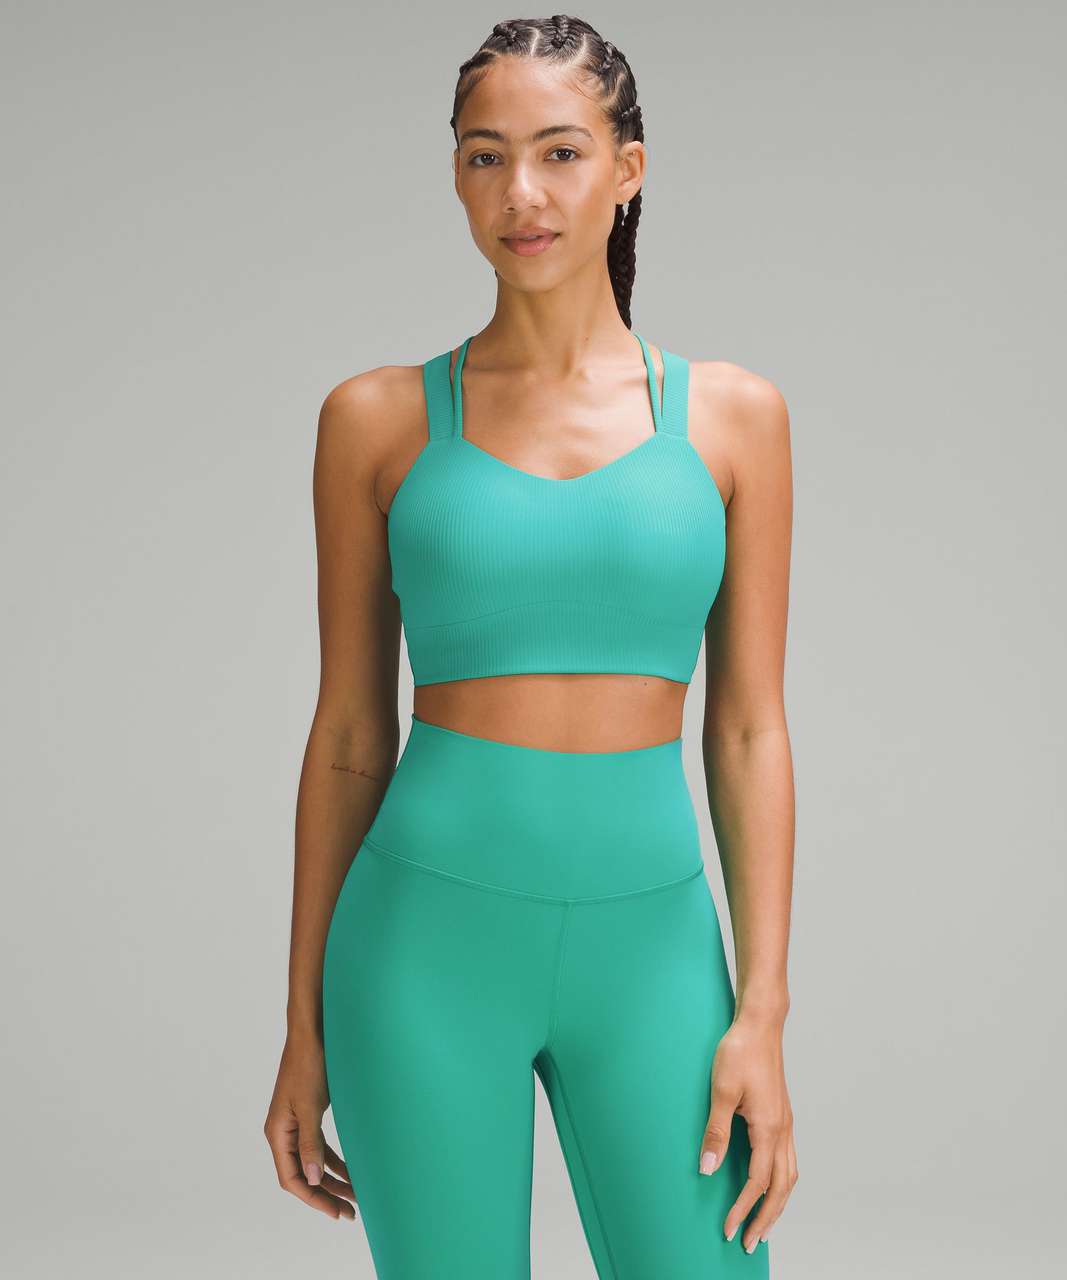 Kelly Green Longline Women's High Impact Sports Bra exclusive at